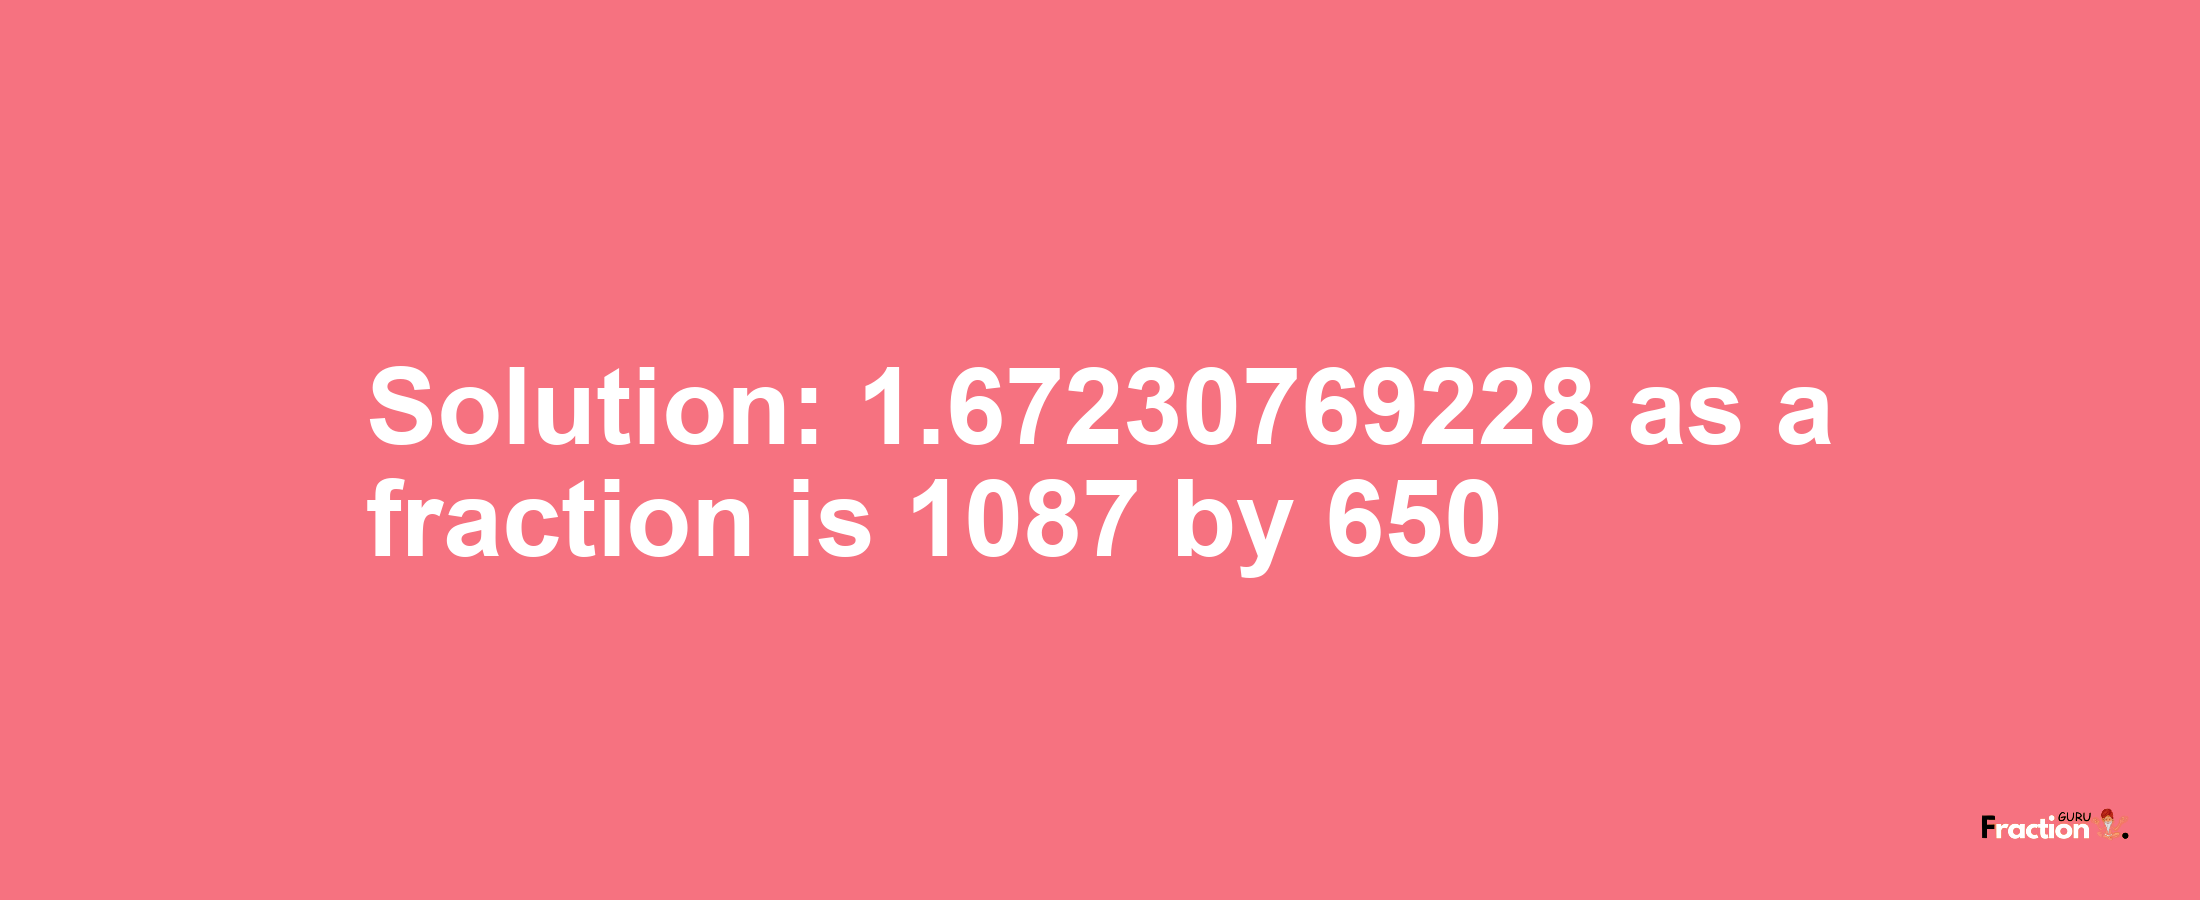 Solution:1.67230769228 as a fraction is 1087/650